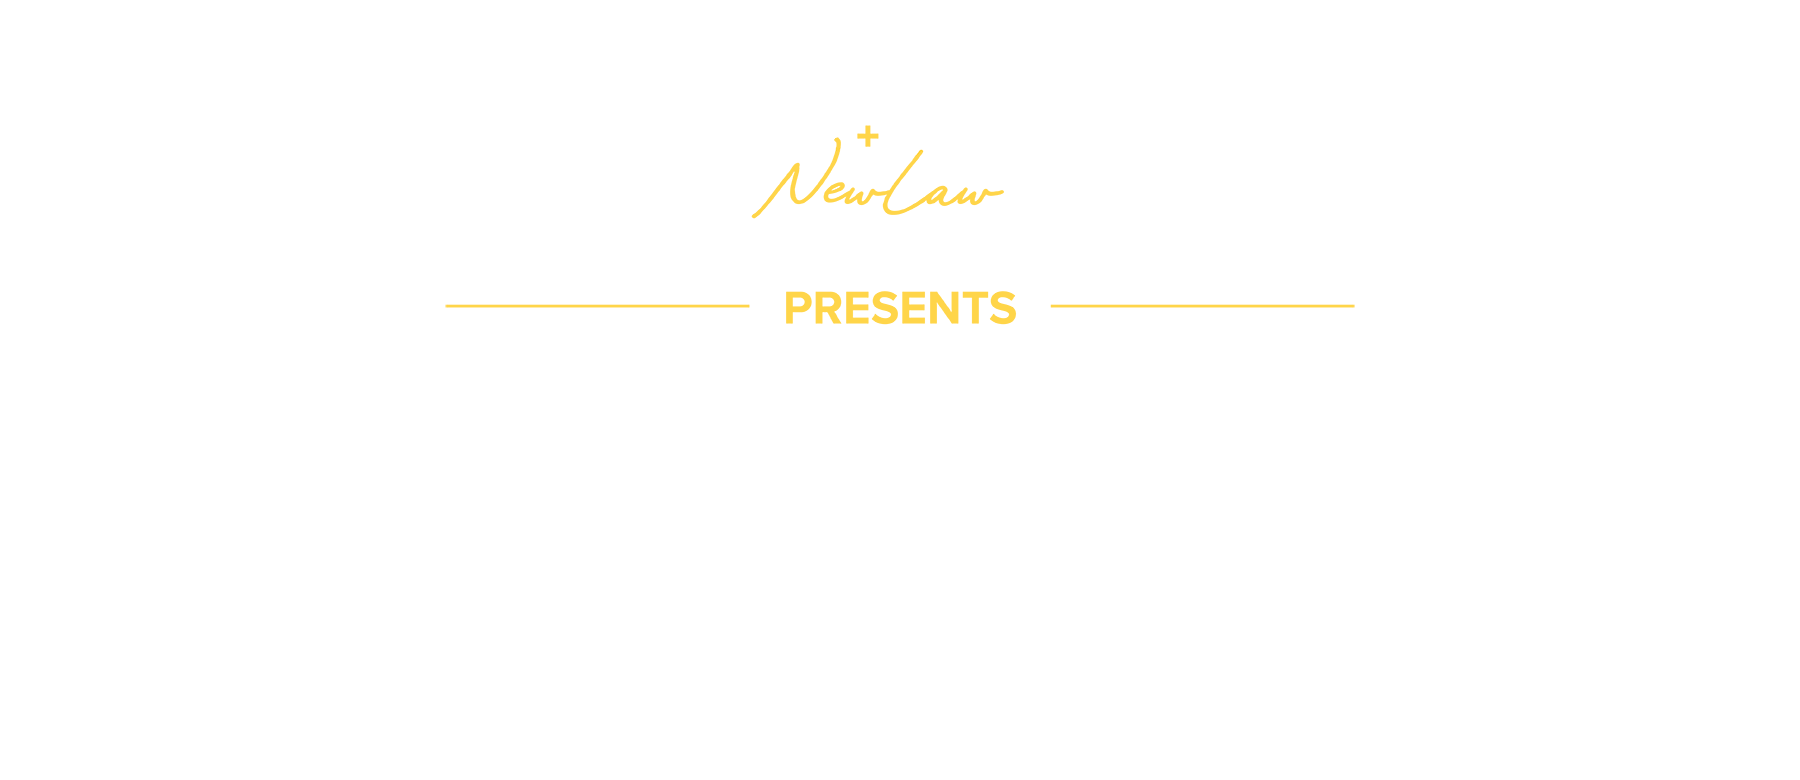 BB-Thinking-Out-Loud